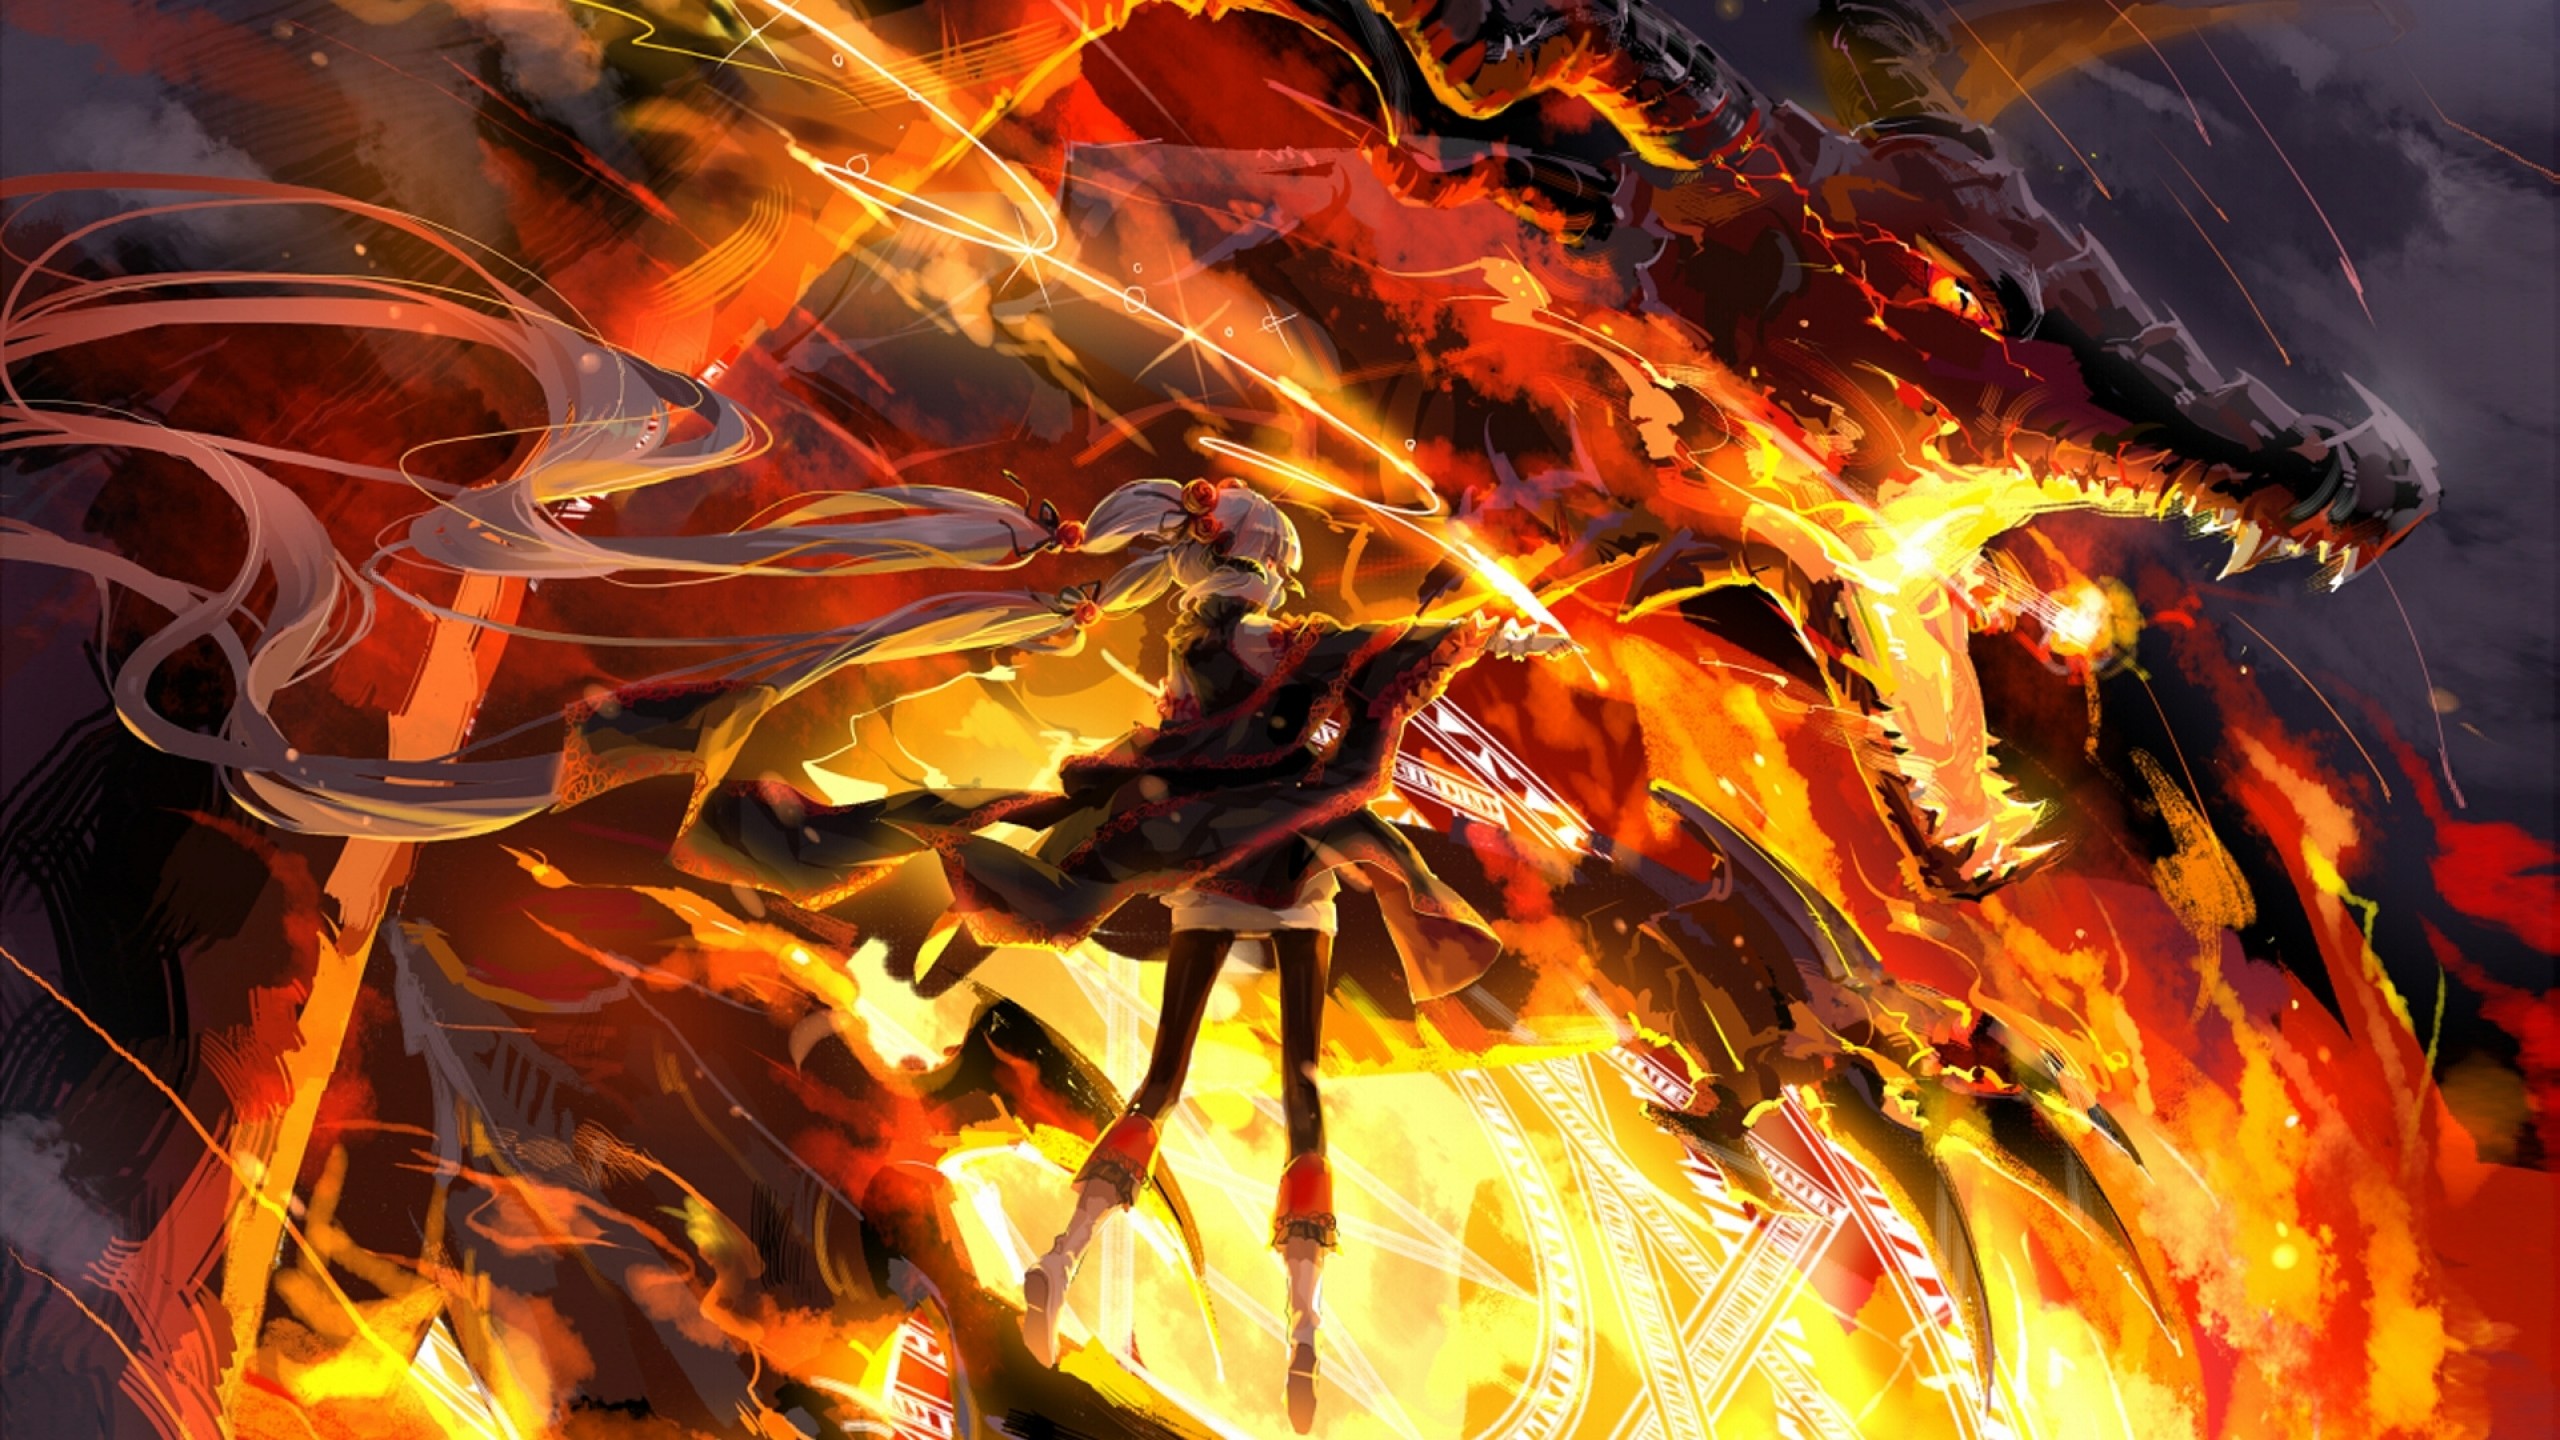 2560x1440 Download Wallpapers, Download  dragons fire anime Best